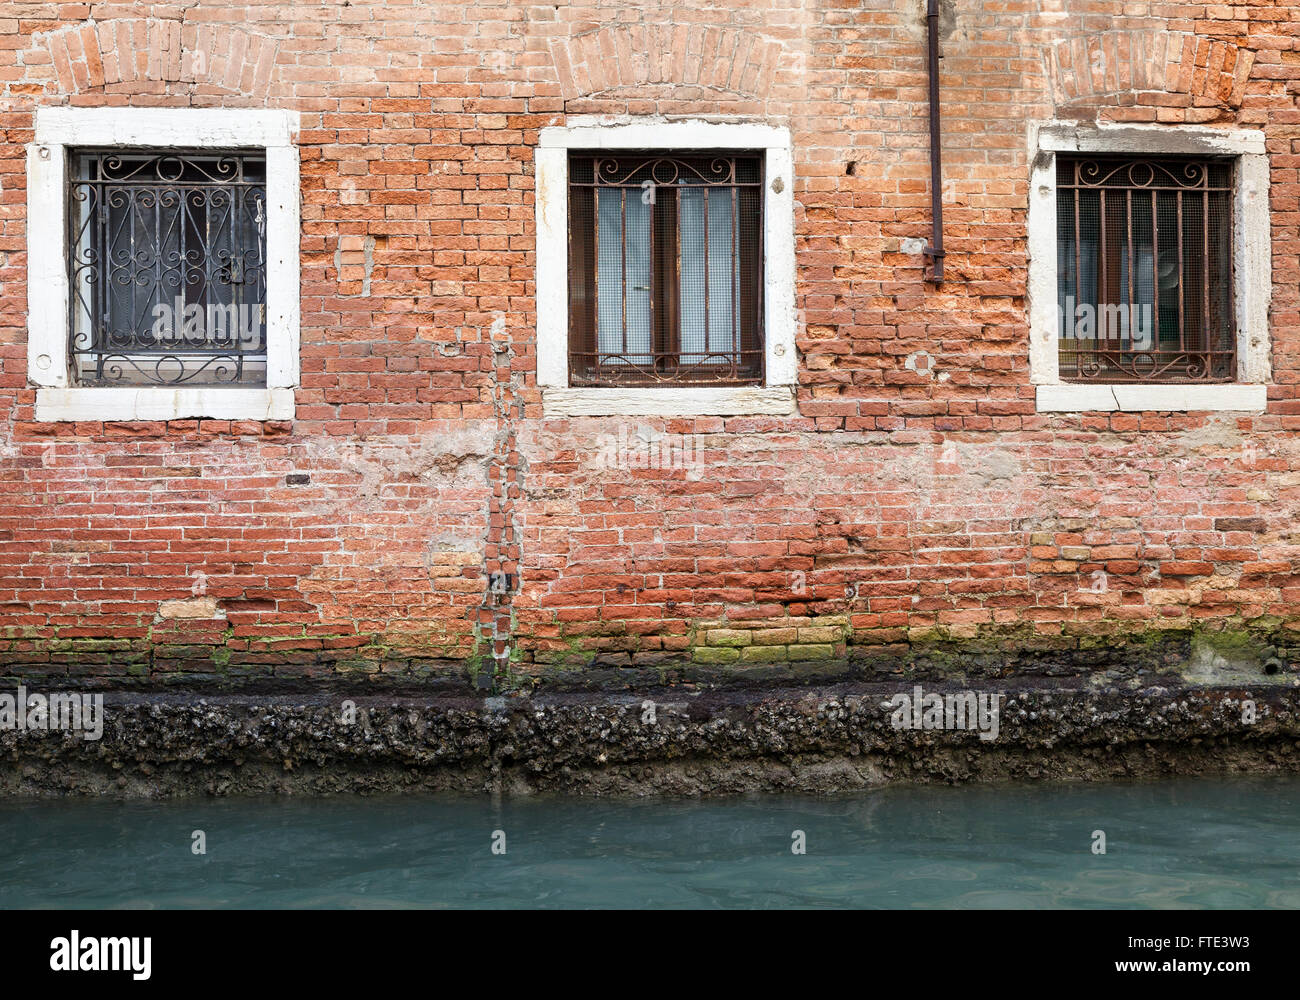 Three wrought iron barred stone-framed windows set in crumbling brickwork, green with algae, in the canal side wall of a building in Venice, Italy Stock Photo